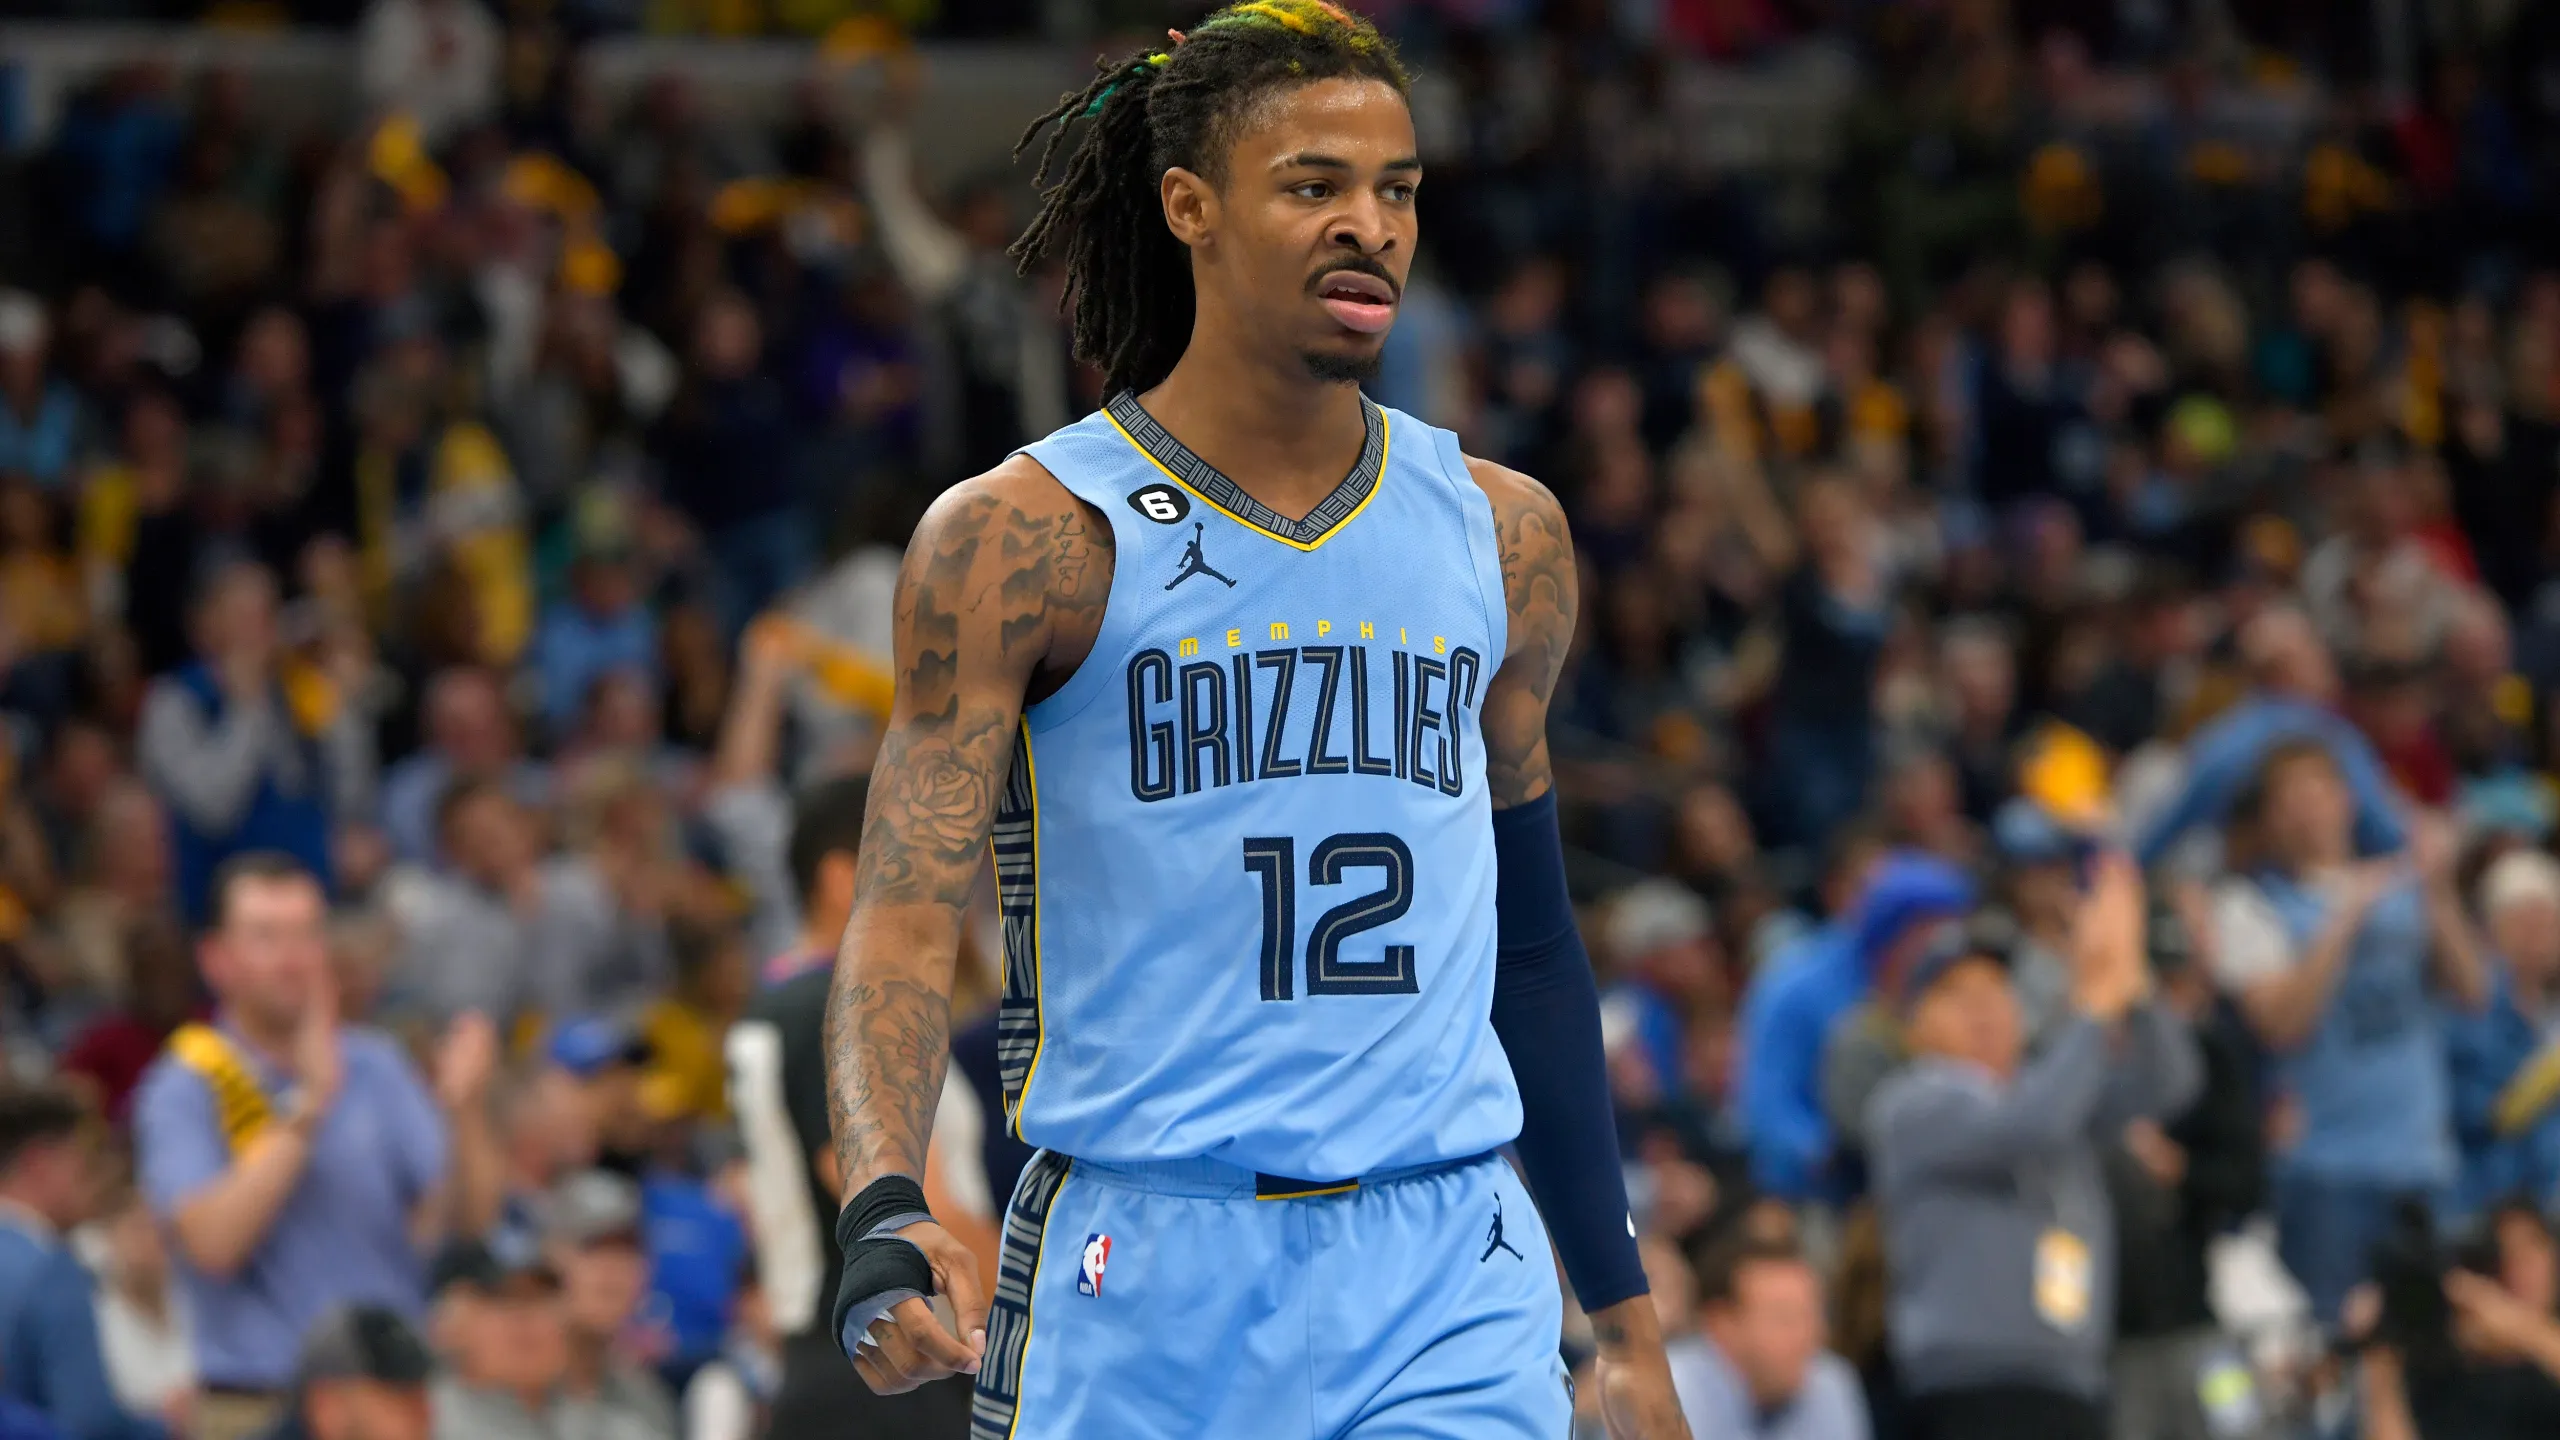 Memphis Grizzlies' Star Ja Morant's Journey Navigating a Season-Ending Shoulder Injury and His Path to Recovery